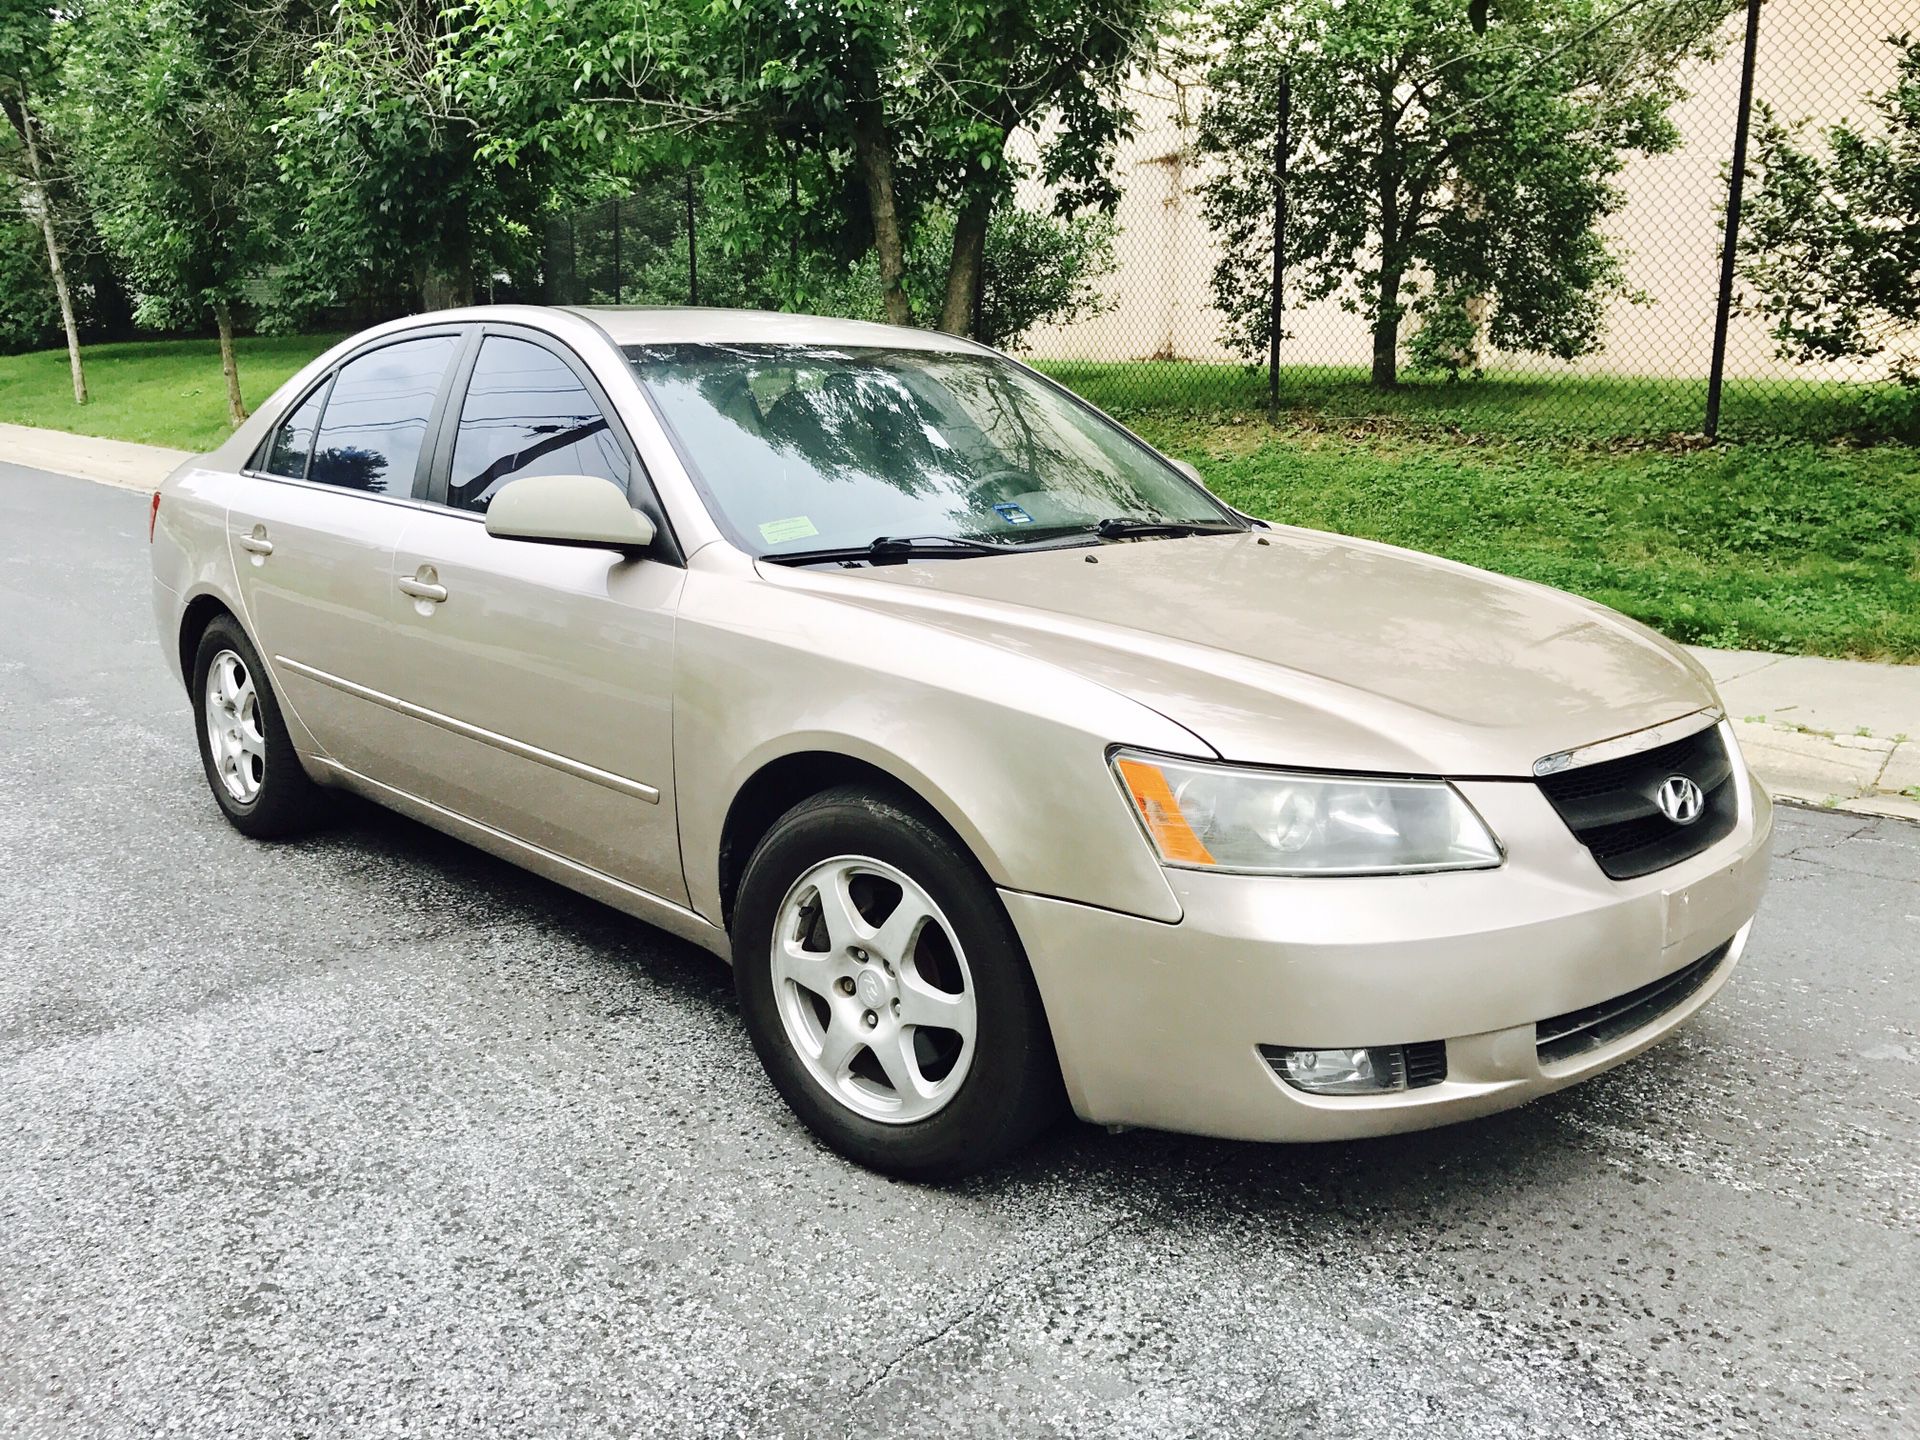 Only $1900 FIRM PRICE !! TODAY ONLY !! NOT NEGOTIABLE!! 2006 Hyundai Sonata Cold AC